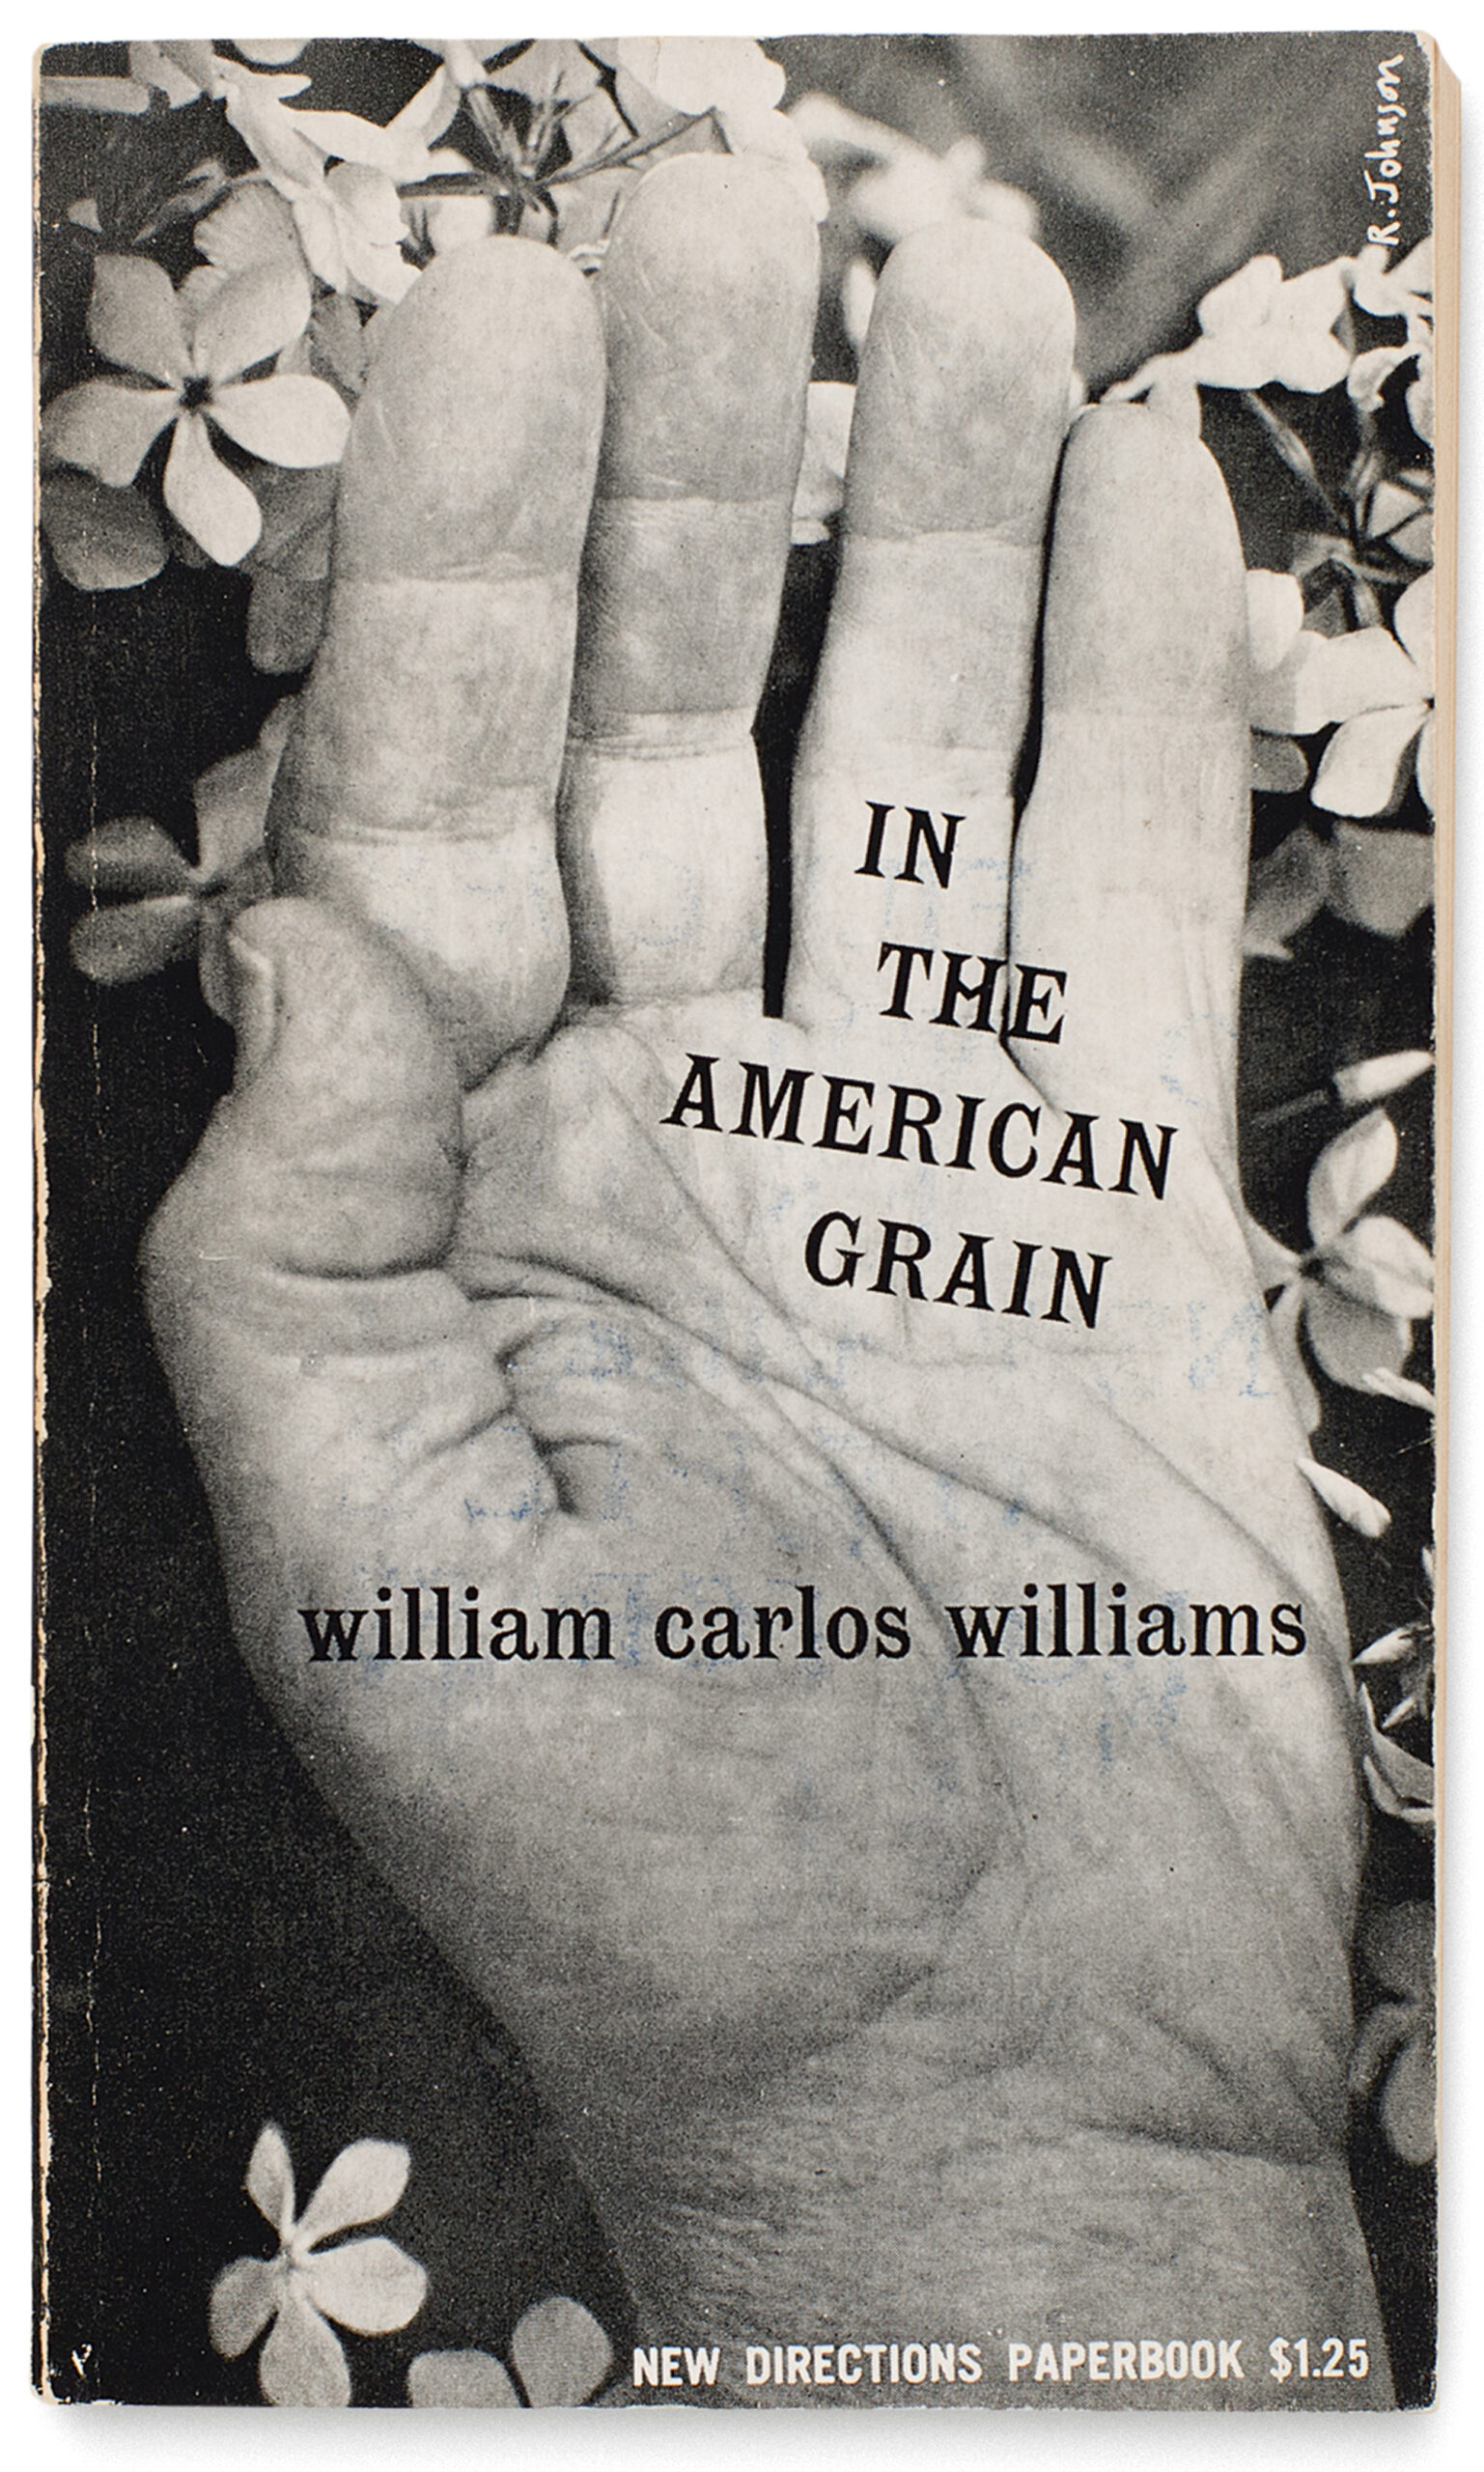 Cover of William Carlos Williams, <em>In The American Grain</em>, 1956
All photographs courtesy New Directions Press, New York”>
		</div>
		<div class=